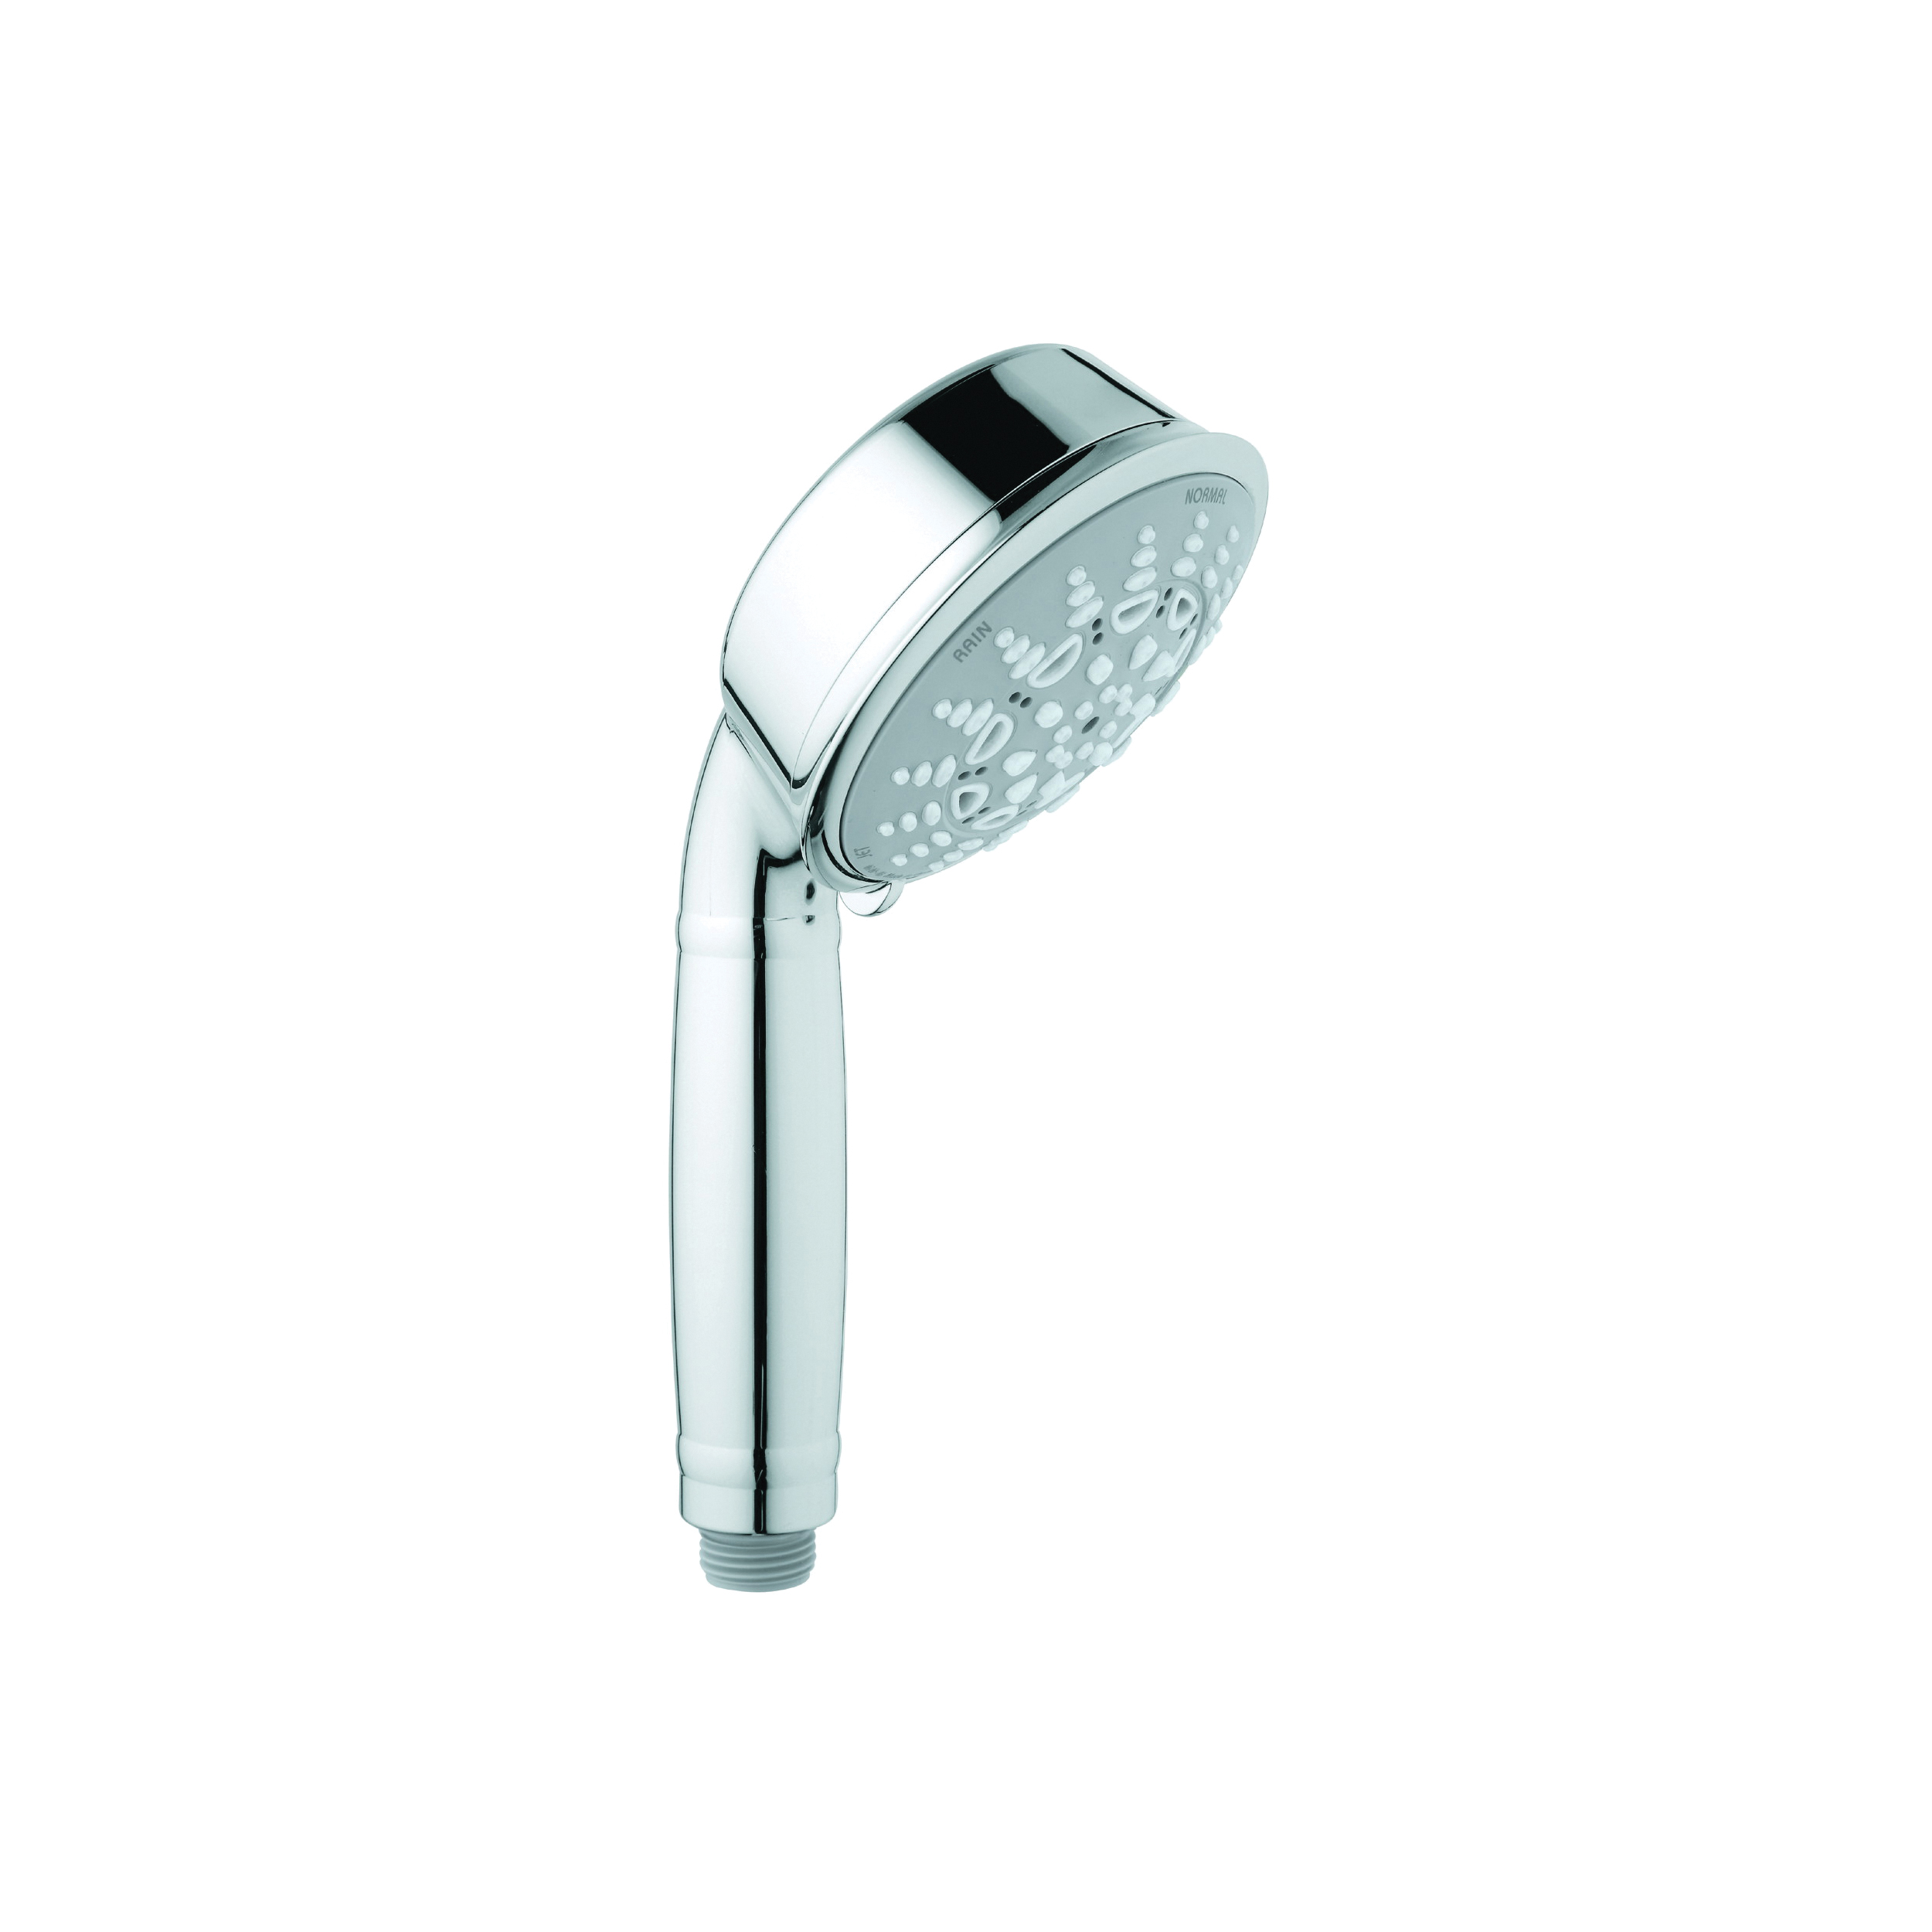 GROHE 27125000 Hand Shower, Relexa® Rustic 100, 2.5 gpm Flow Rate, 5 Sprays, 1/2 in Connection, Import